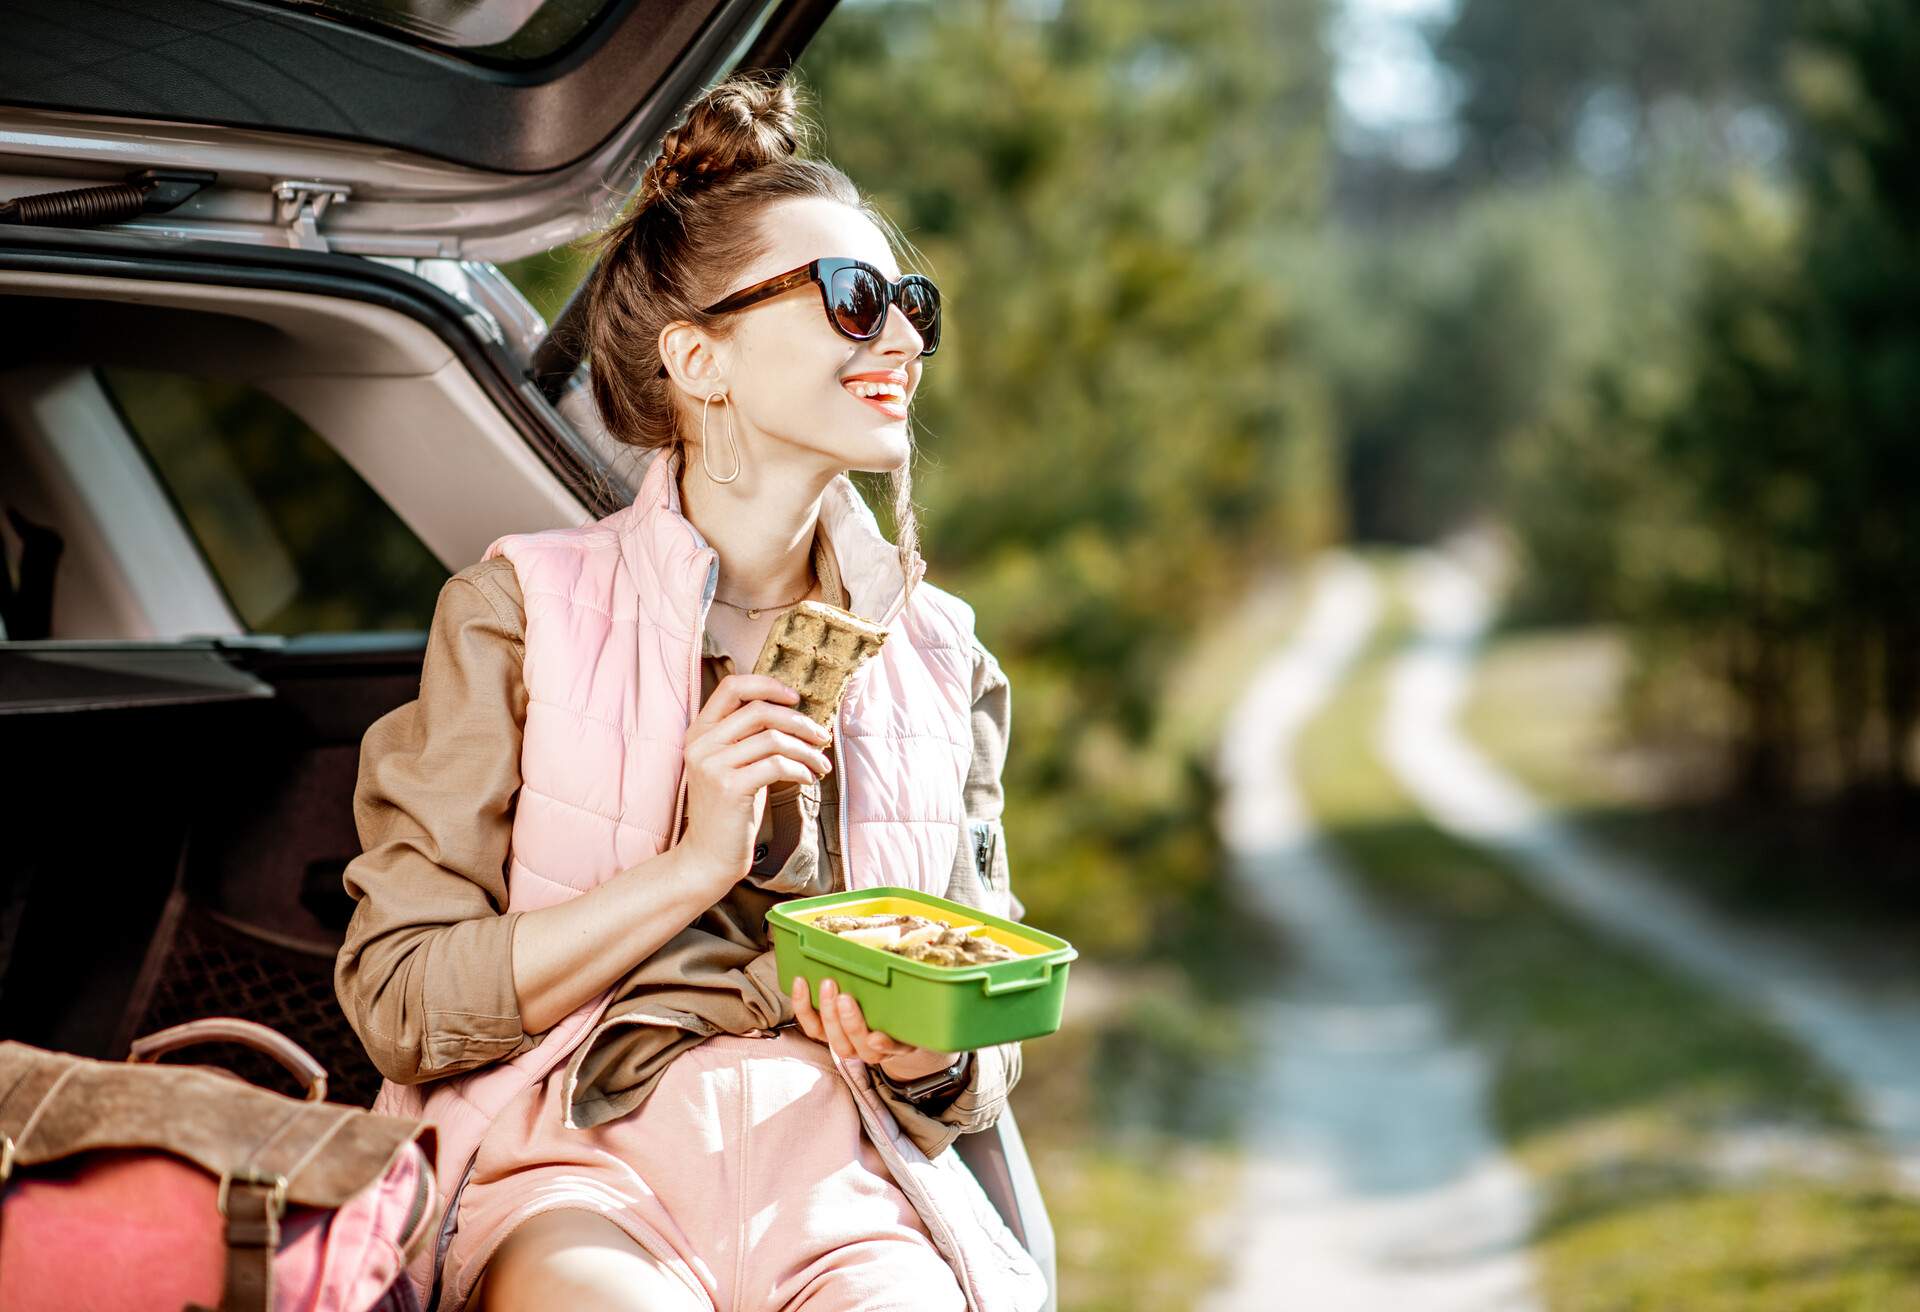 THEME_CAR_ROADTRIP_PEOPLE__FOOD_PACKED_LUNCH_GettyImages-1141989773